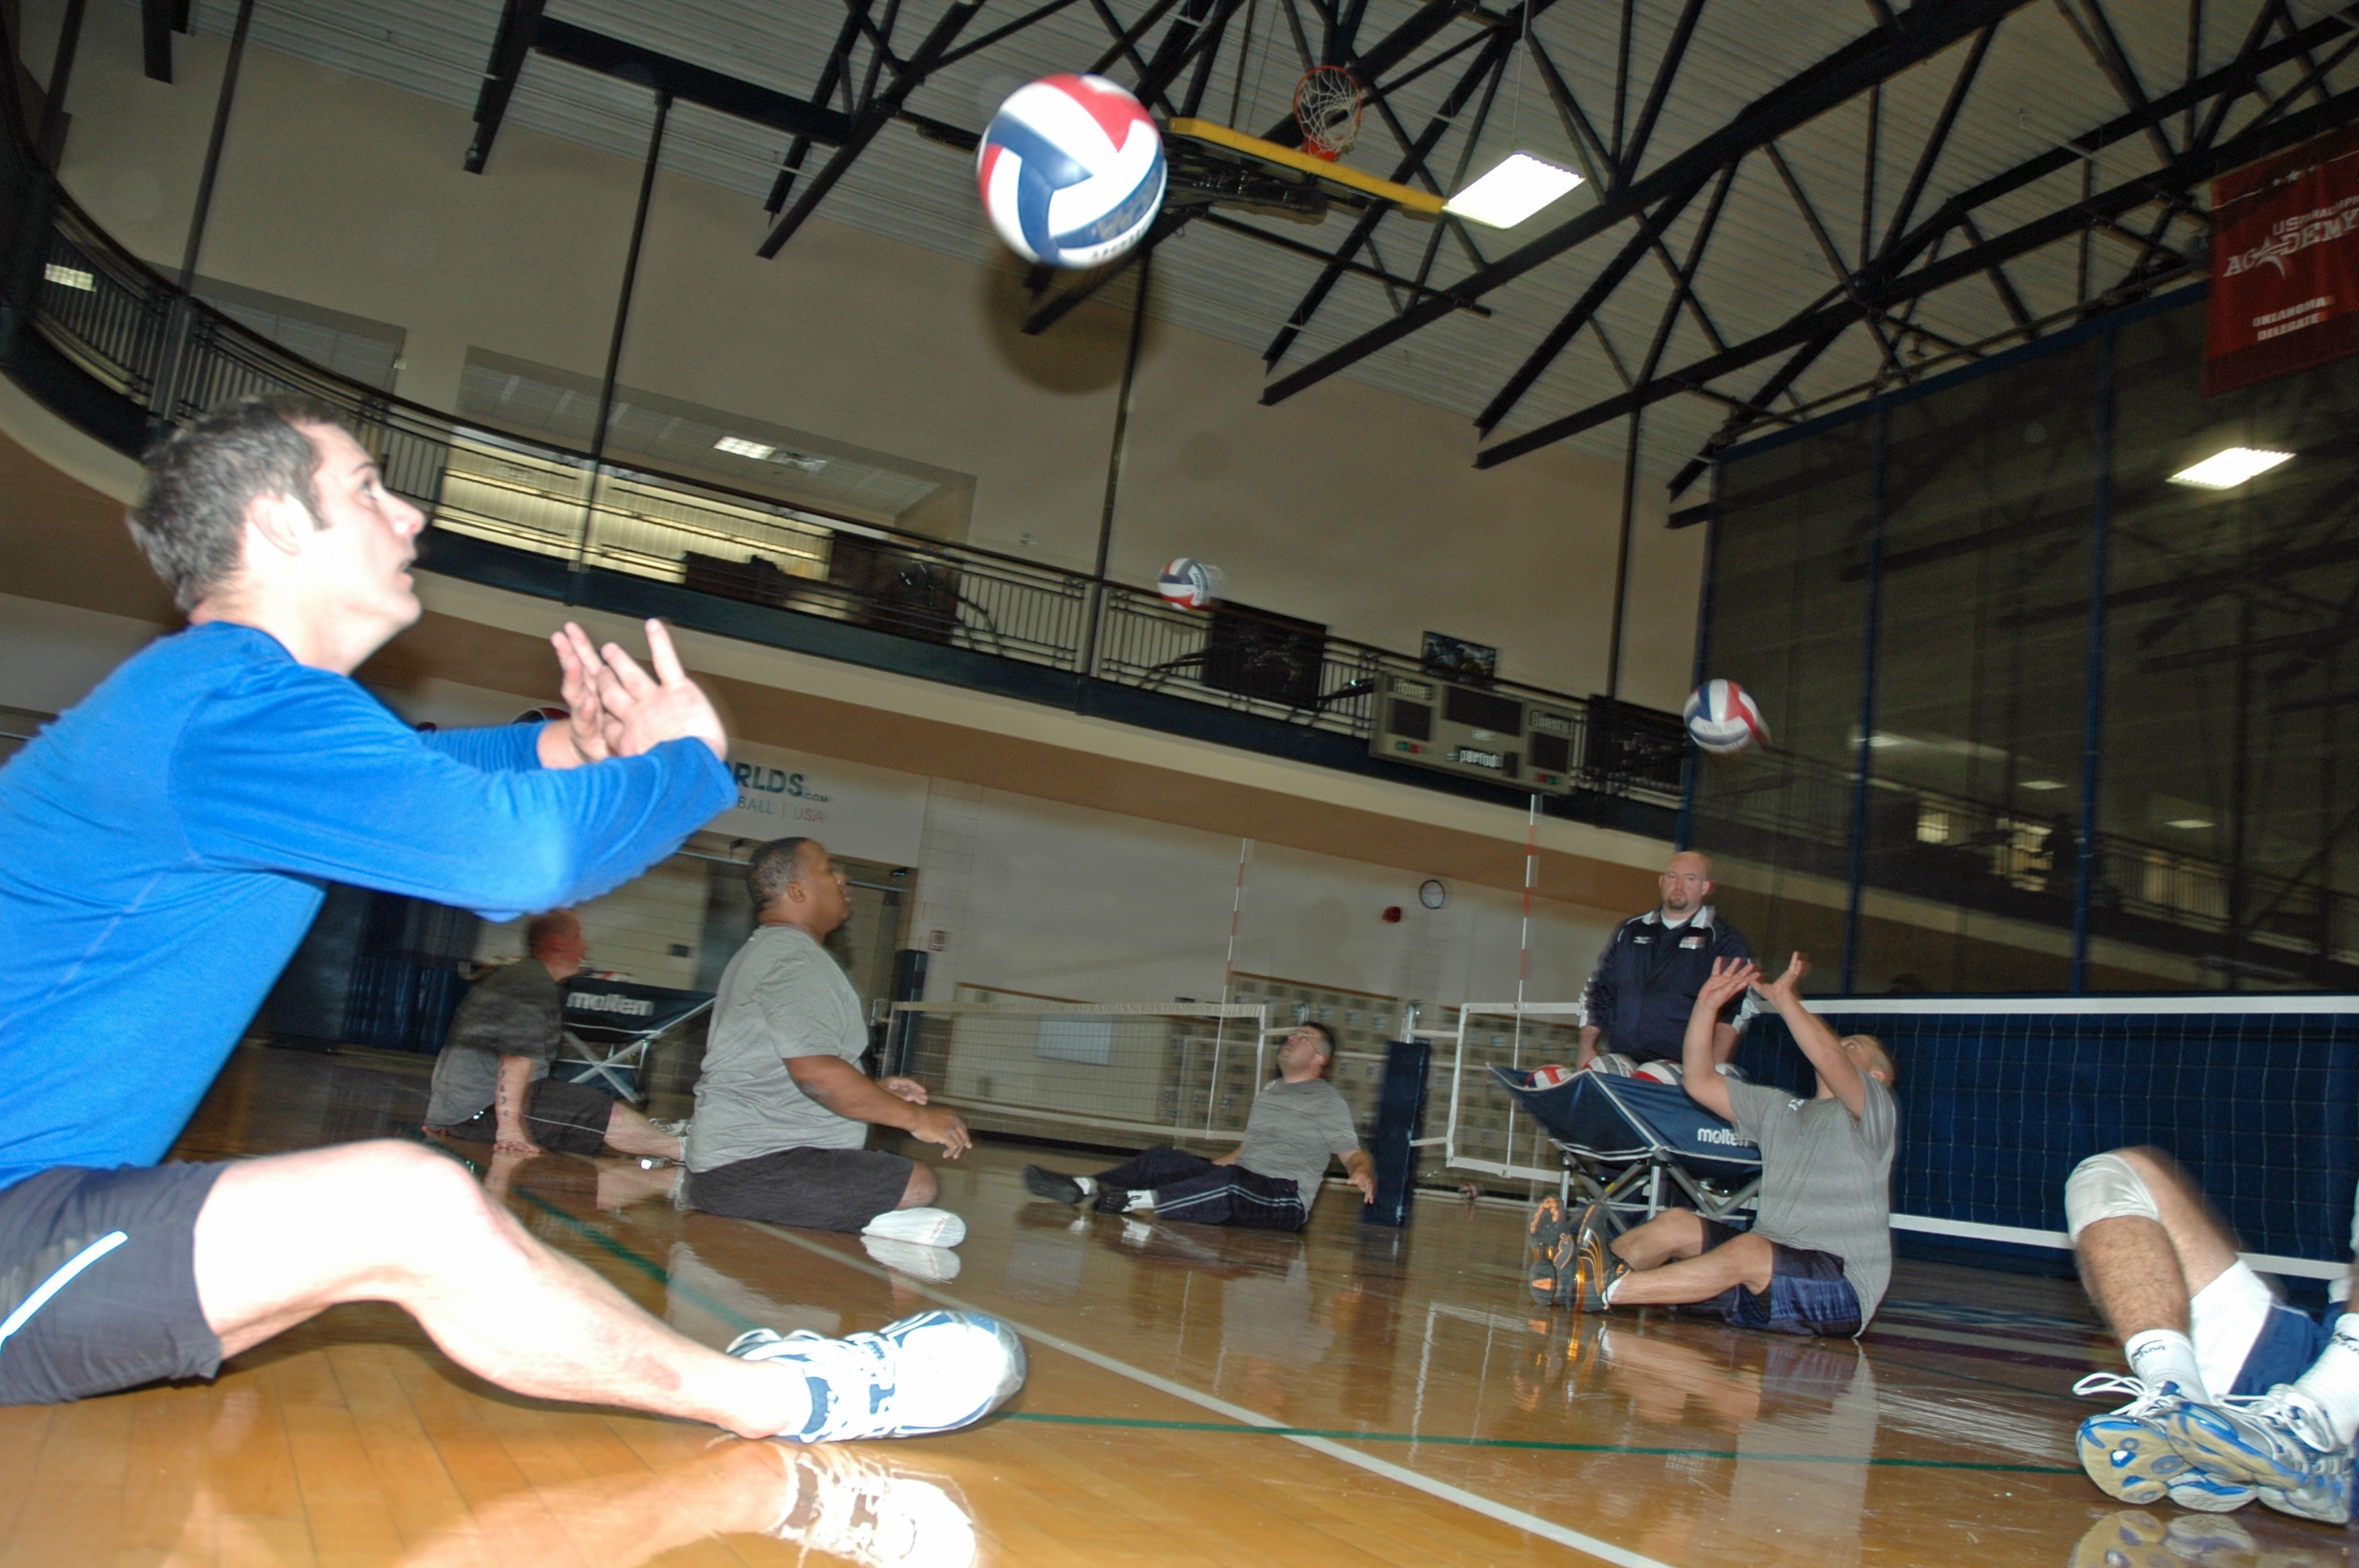 SFC Chris Livesay, Ft. Carson, CO, practices hitting a volleyball with other wounded warrior athletes during a sitting volleball training clinic held at the University of Central Oklahoma.